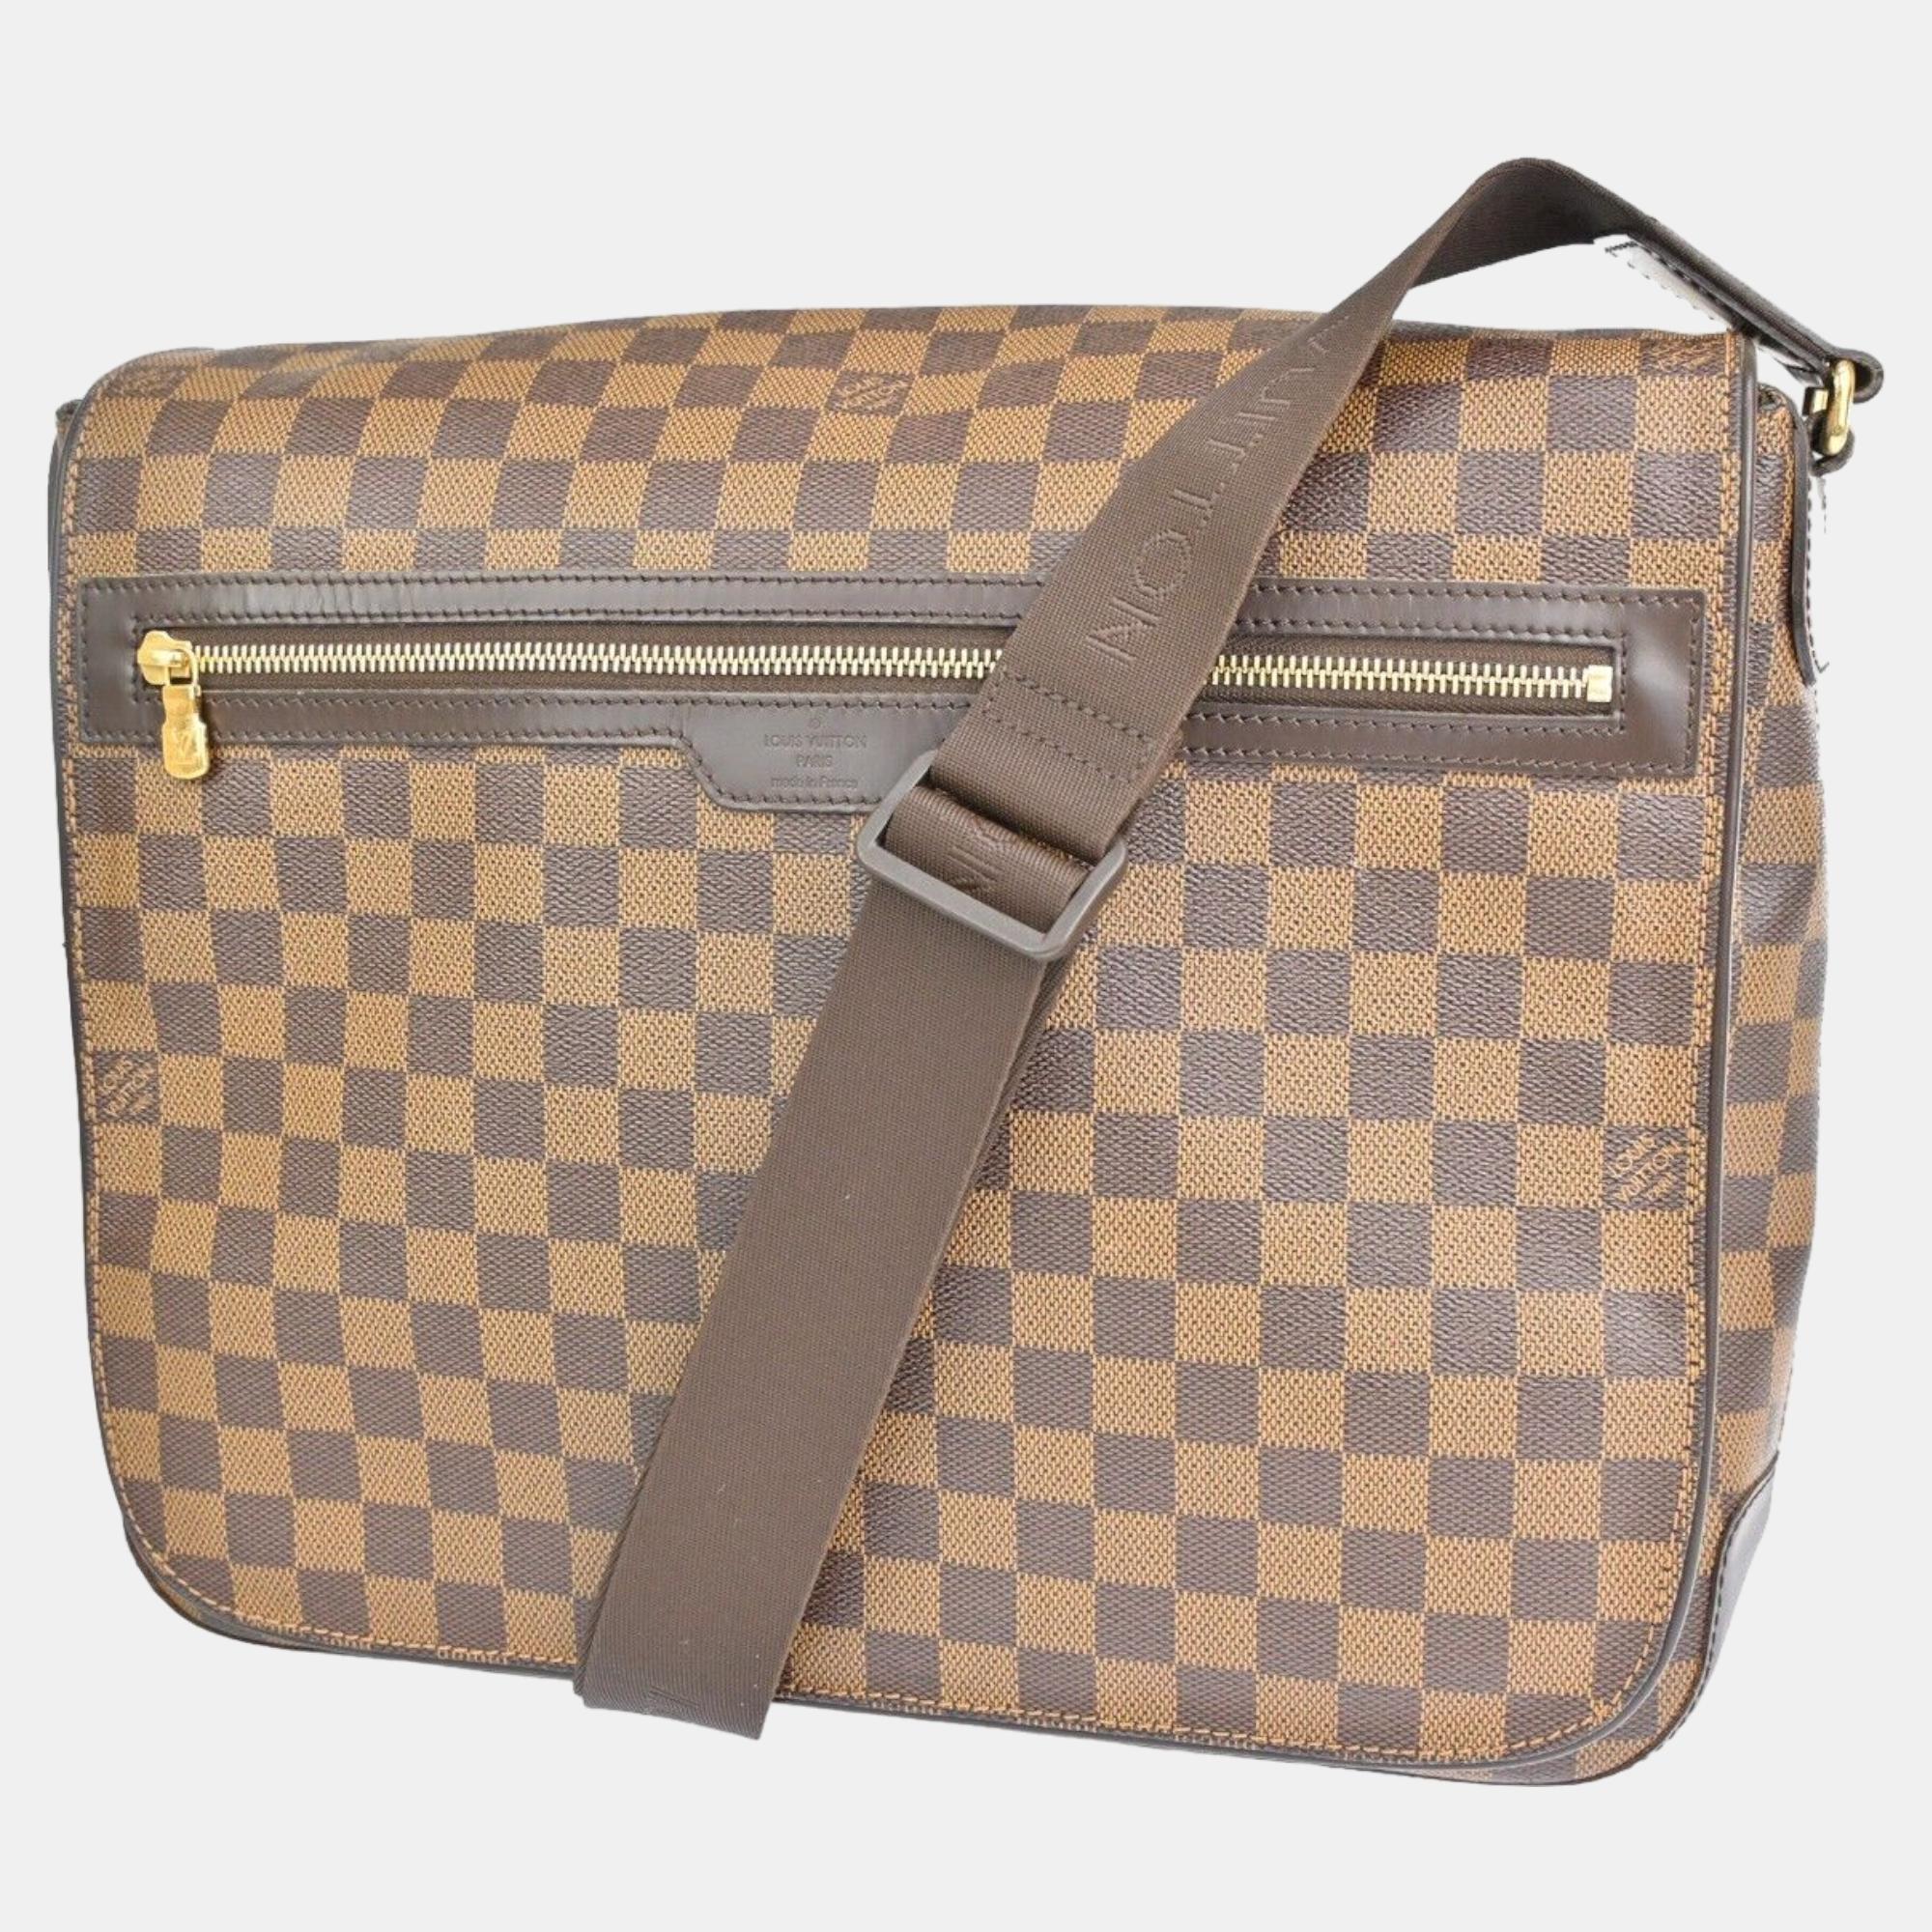 Uncompromising in quality and design this Louis Vuitton bag is a must have in any wardrobe. With its durable construction and luxurious finish its the perfect accessory for any occasion.